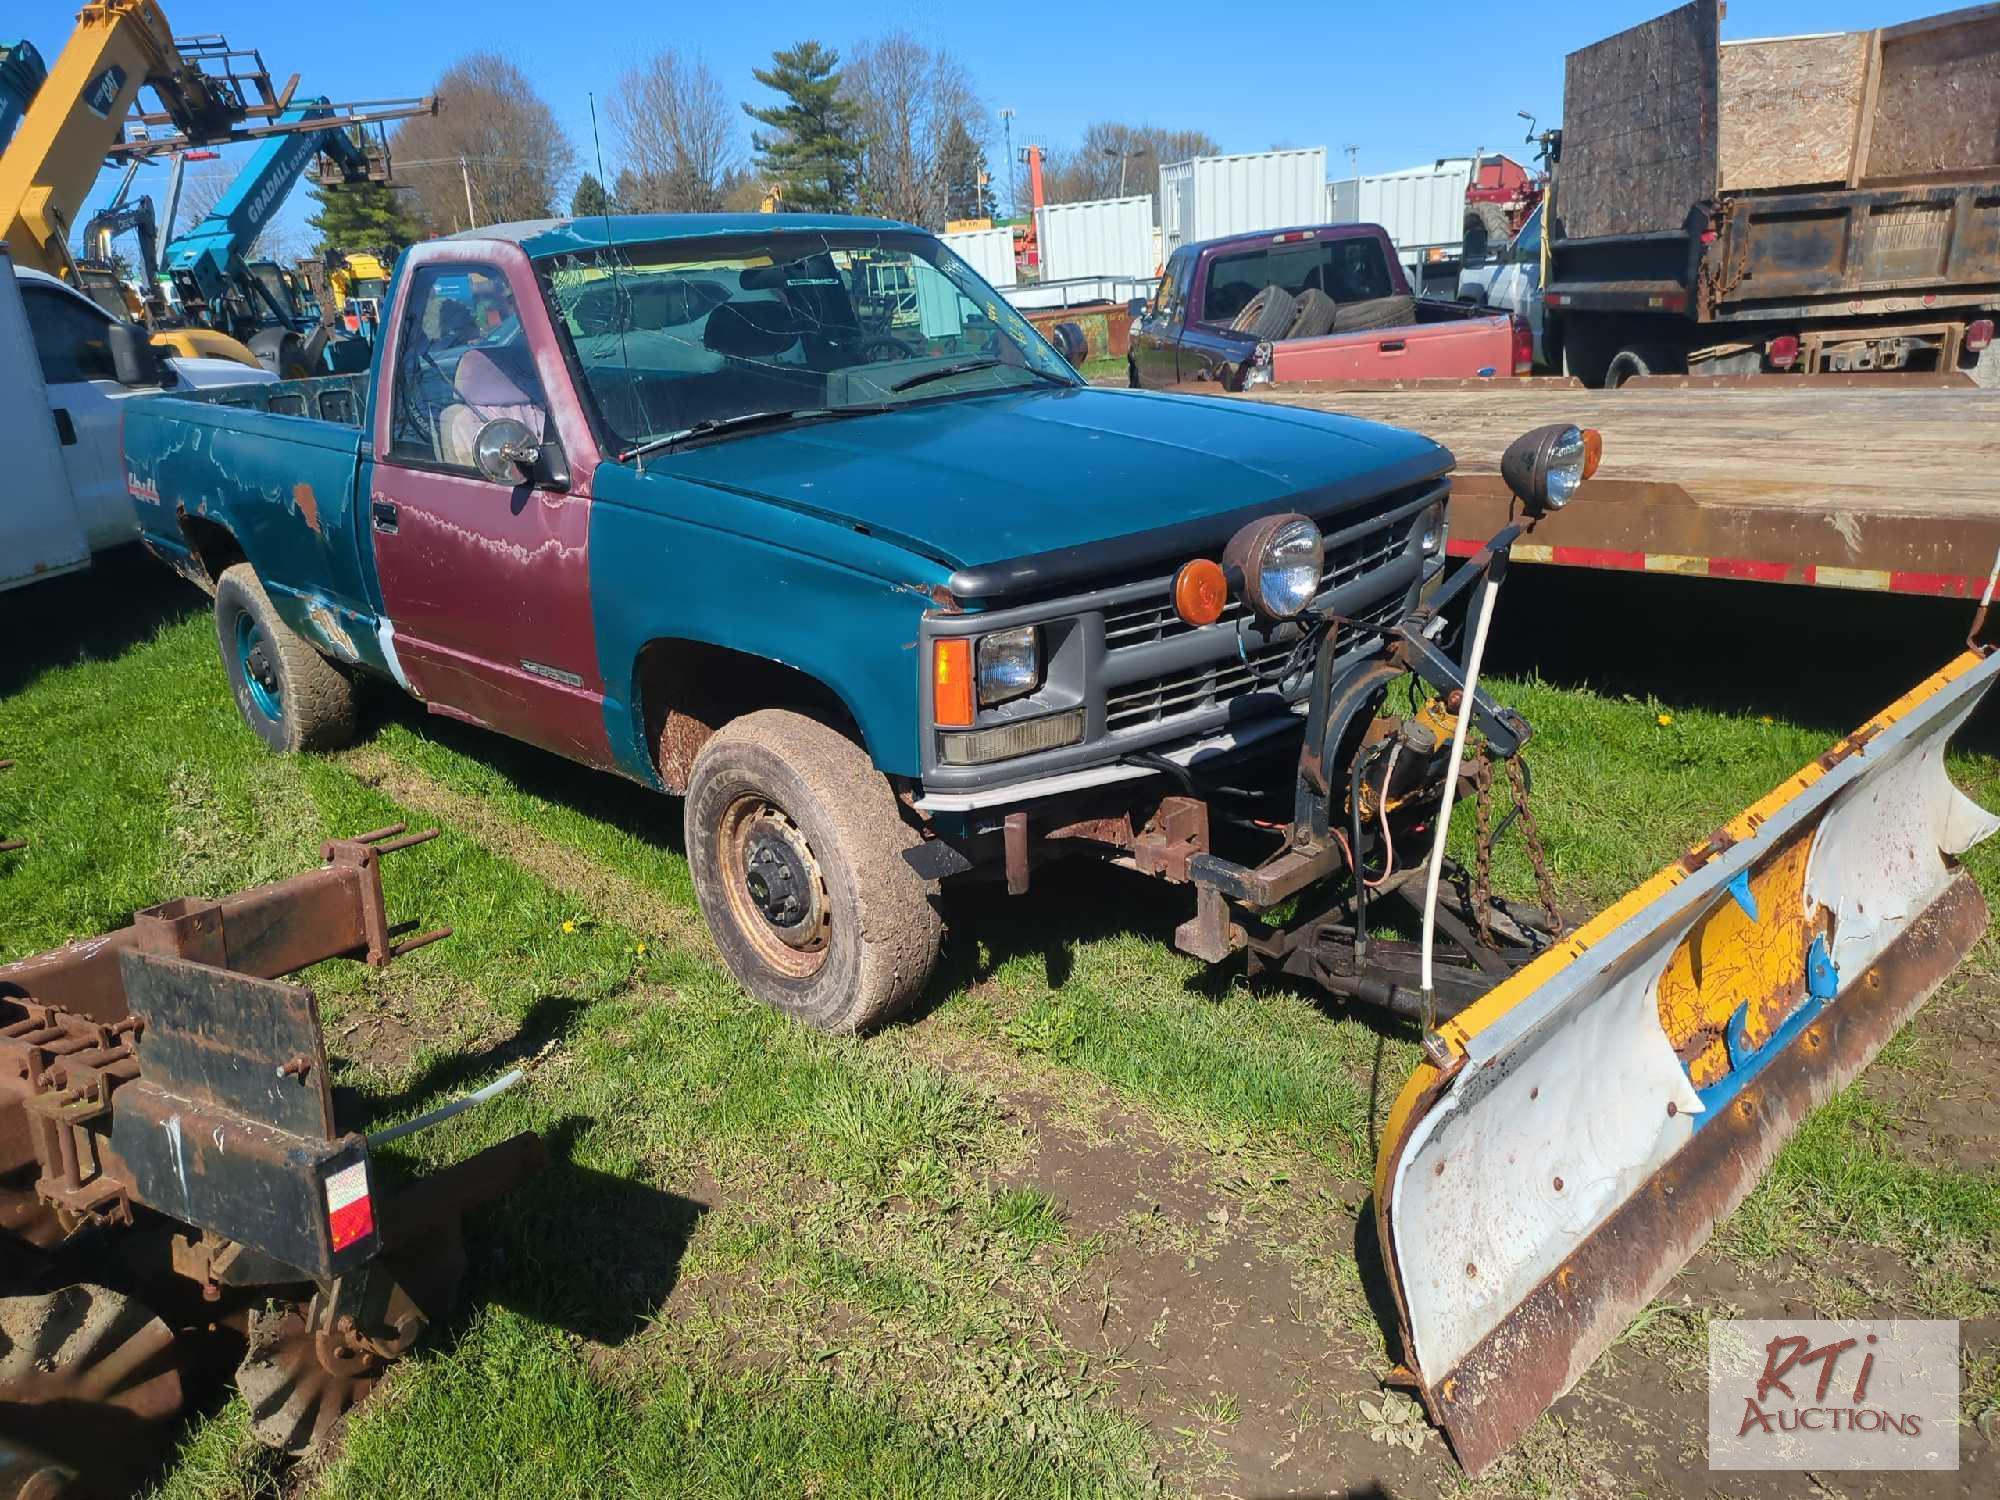 1994 Chevy 1500 regular cab pickup, 4WD, plow, A/C, 209,991 miles, runs very poorly,